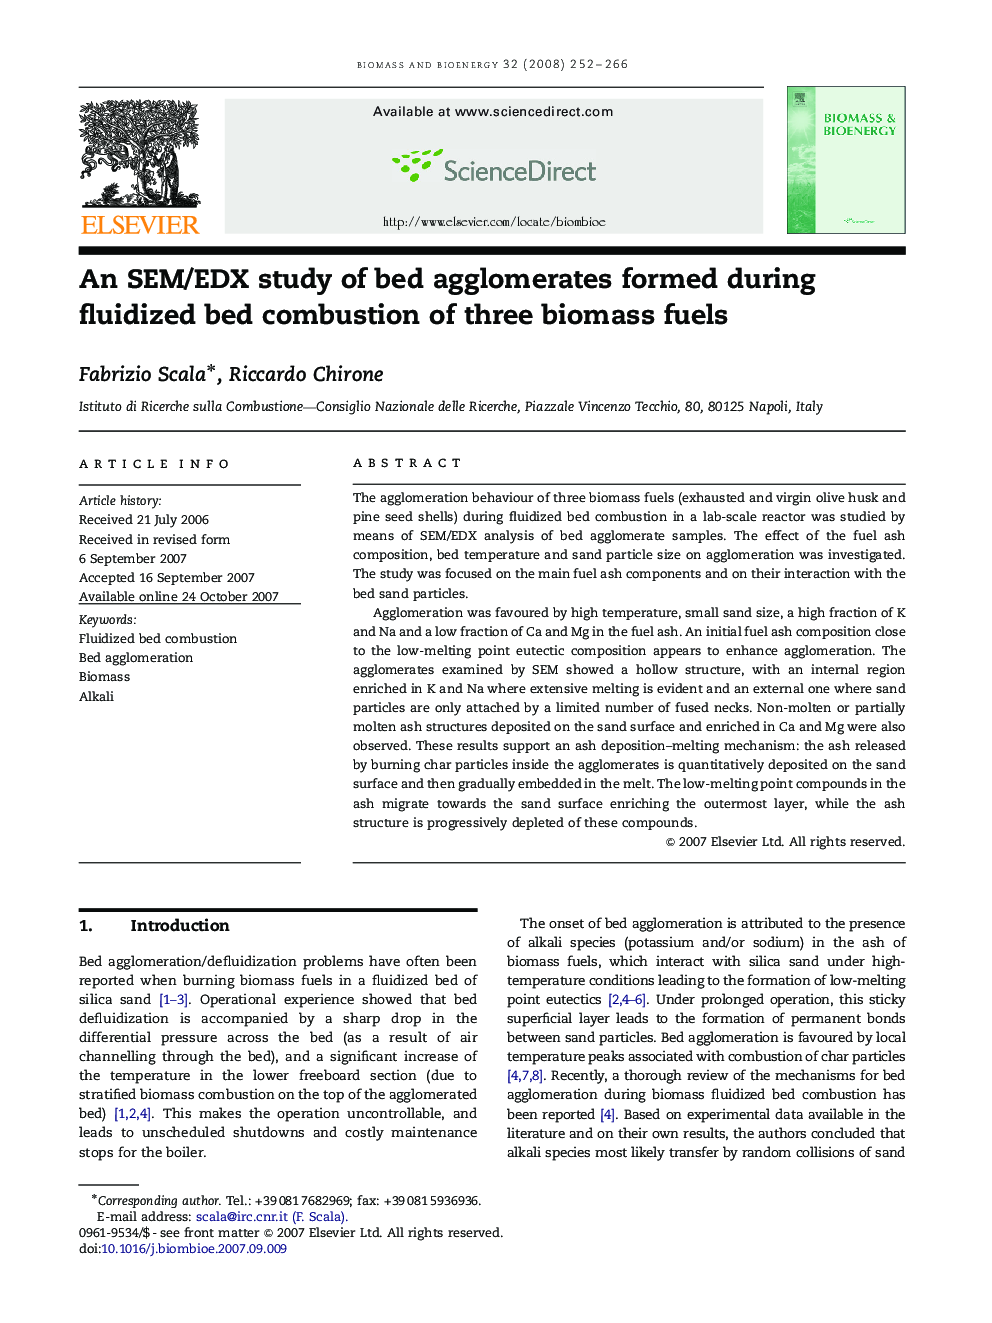 An SEM/EDX study of bed agglomerates formed during fluidized bed combustion of three biomass fuels